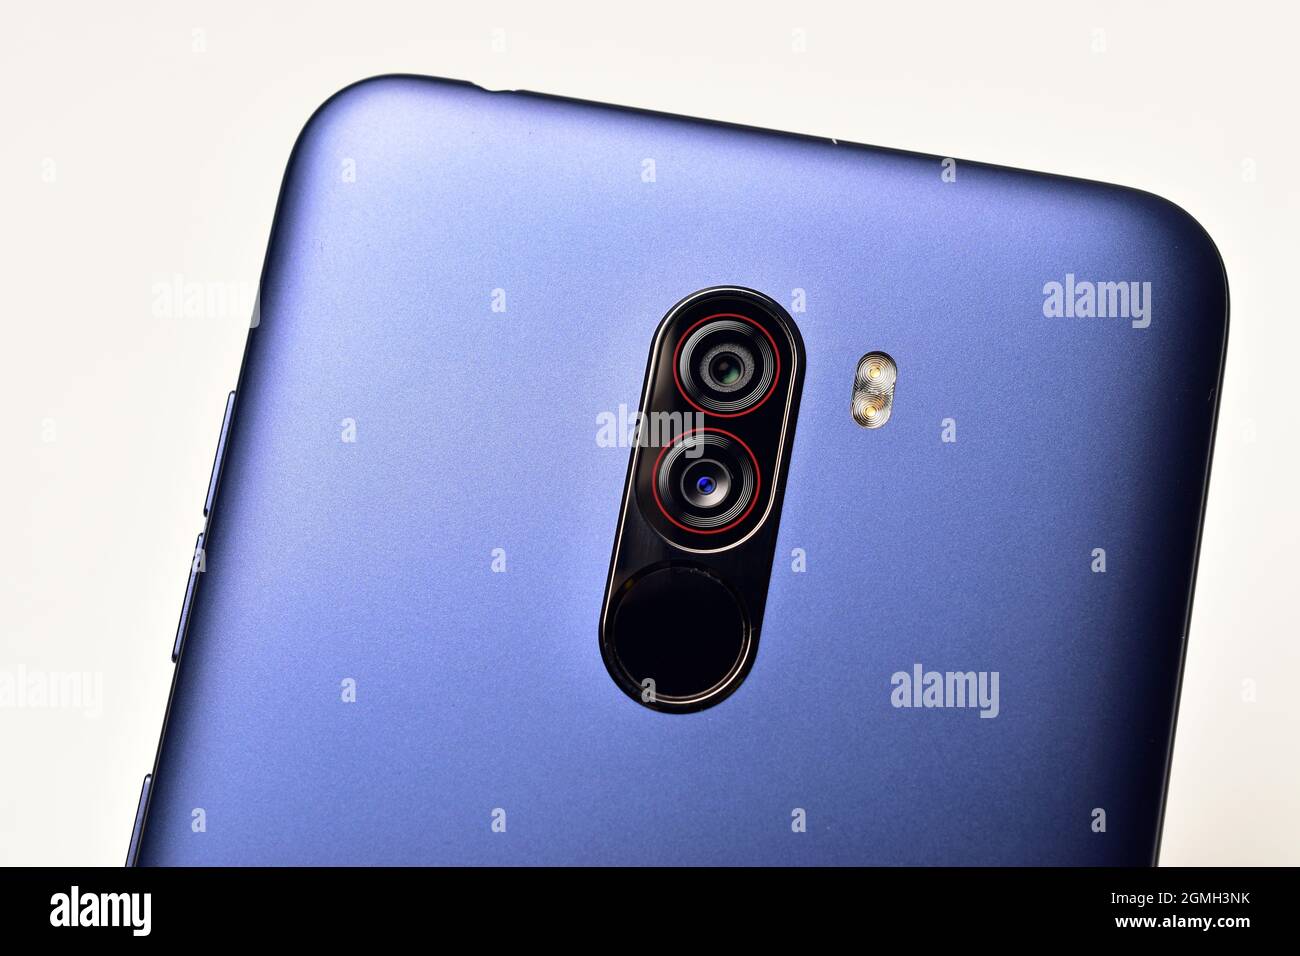 Dual Camera Smartphone with Flash Stock Photo